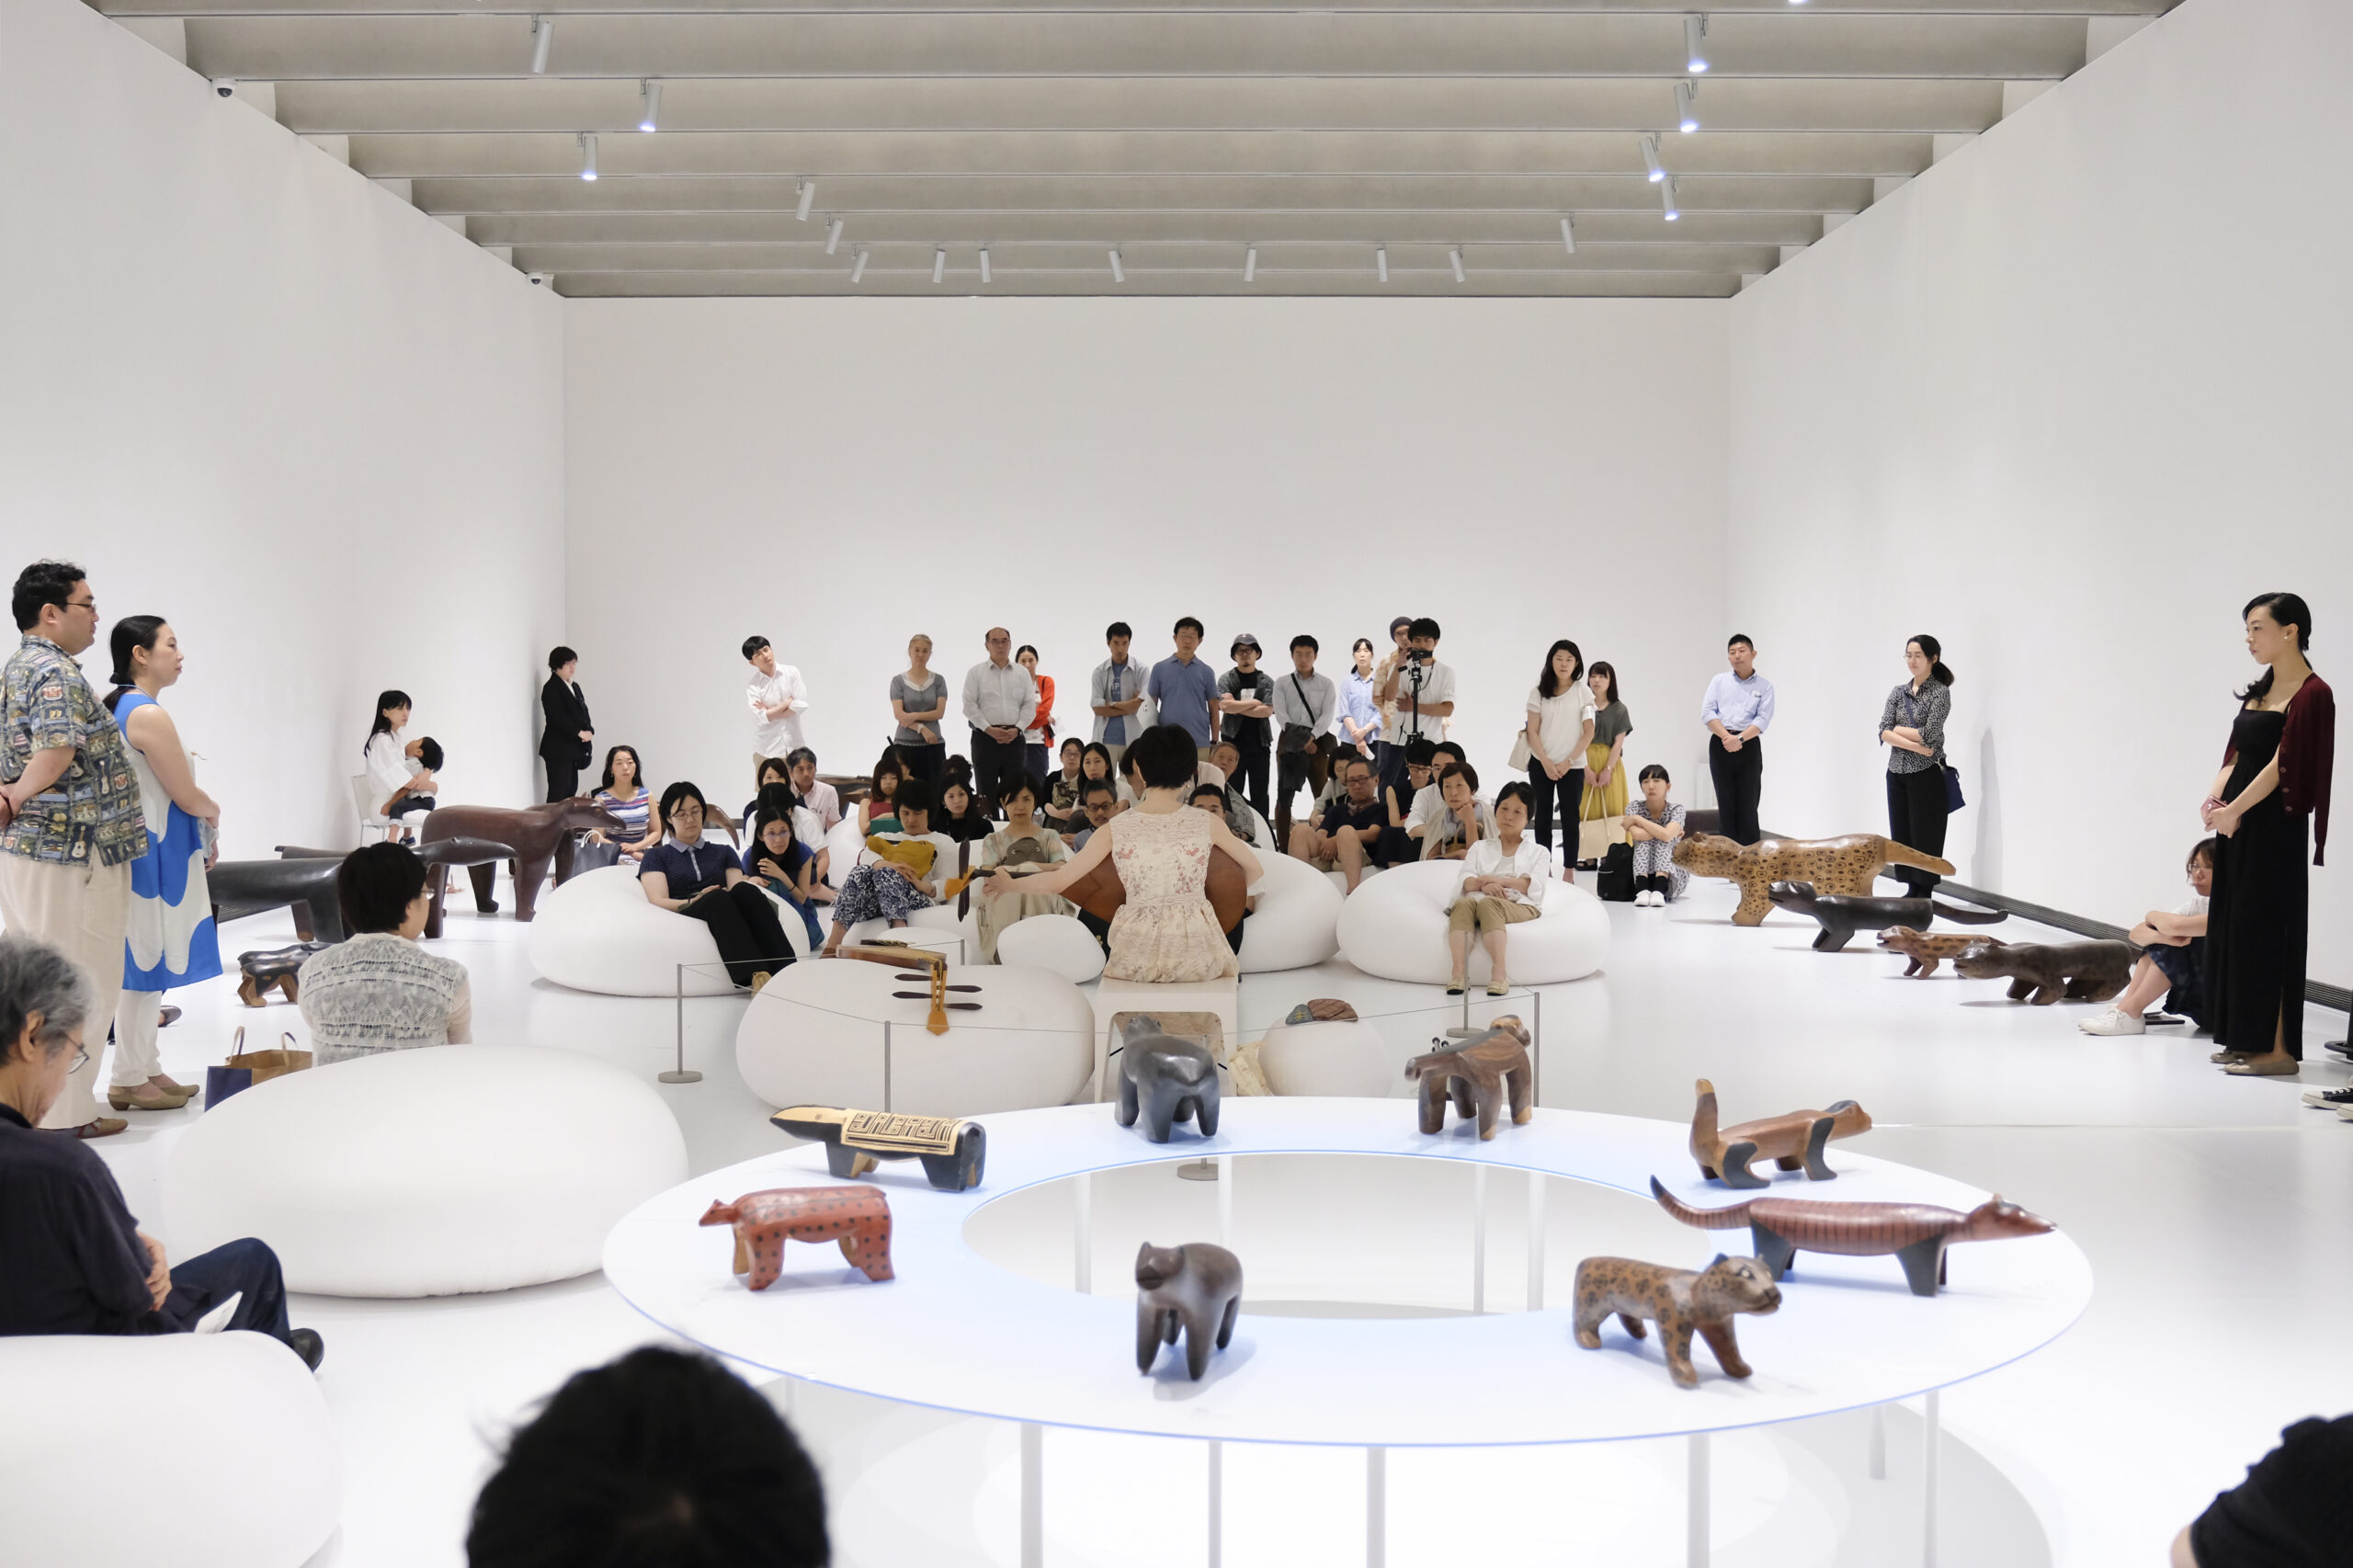 play – for Tokyo Metropolitan Teien Art Museum for the exhibition “Indigenous Brazilian Chairs: Wildlife and Imagination